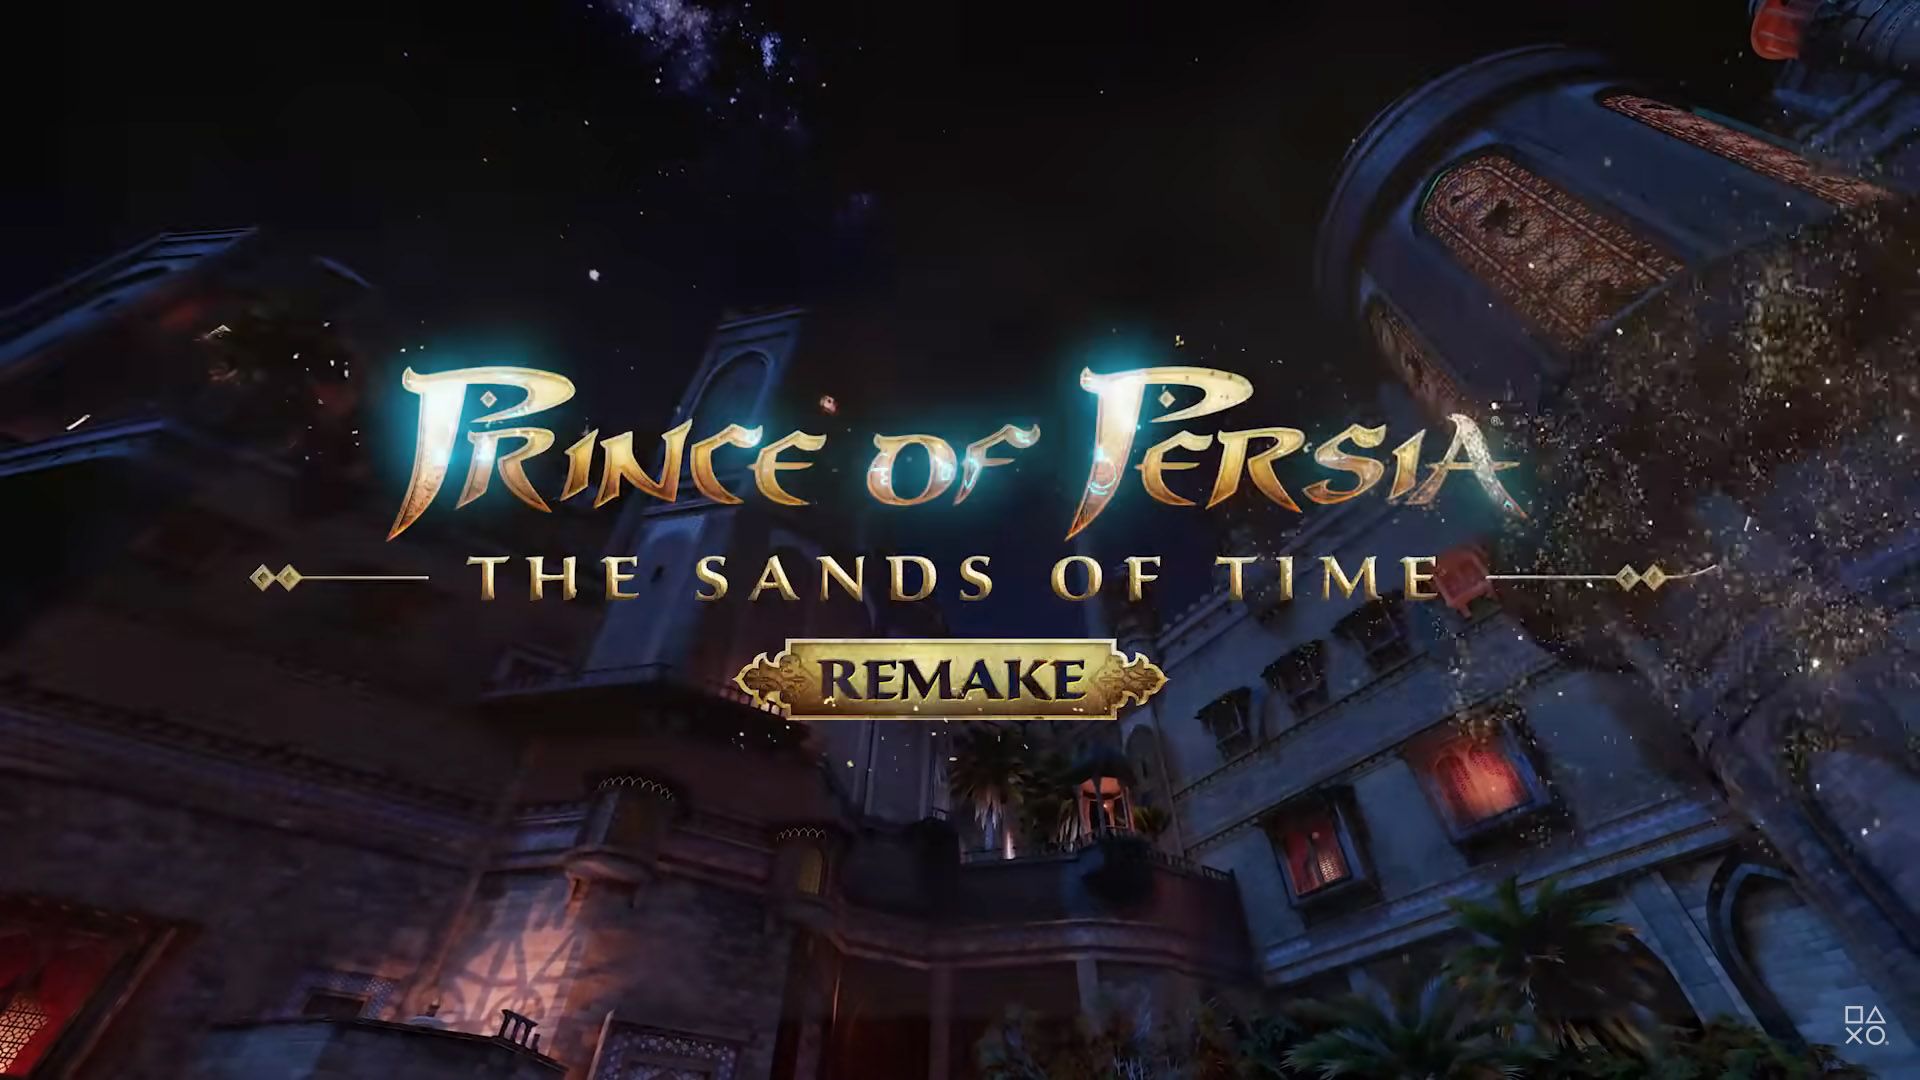 Prince of Persia The Sands of Time Remake Trailer Title